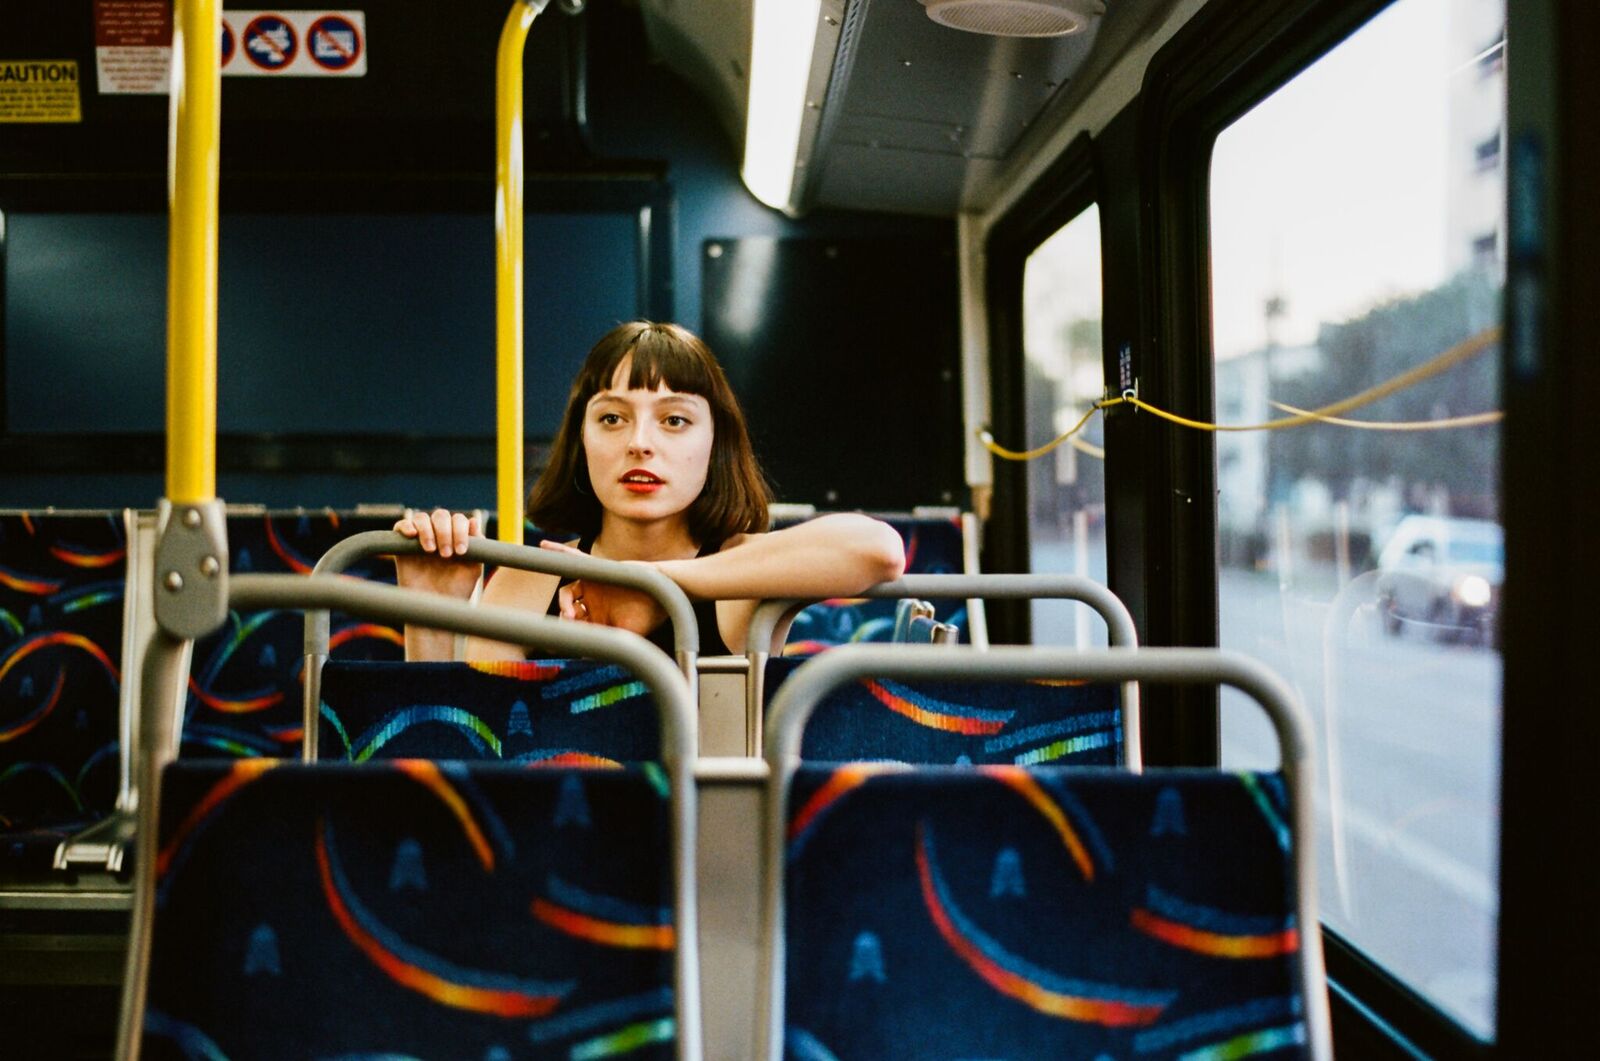 Bands To Watch 2019 – STELLA DONNELLY